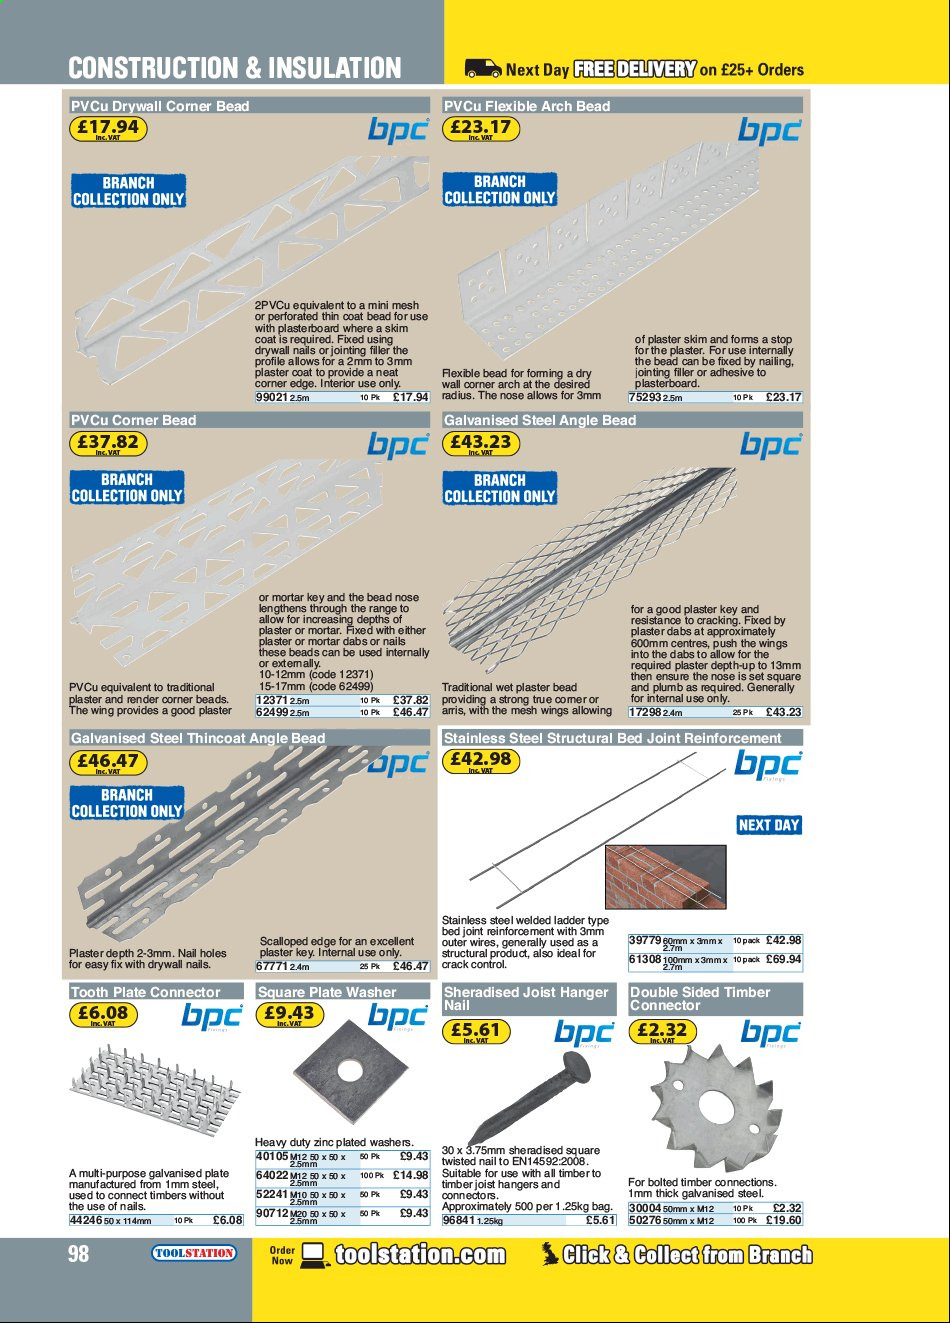 Toolstation offer . Page 98.